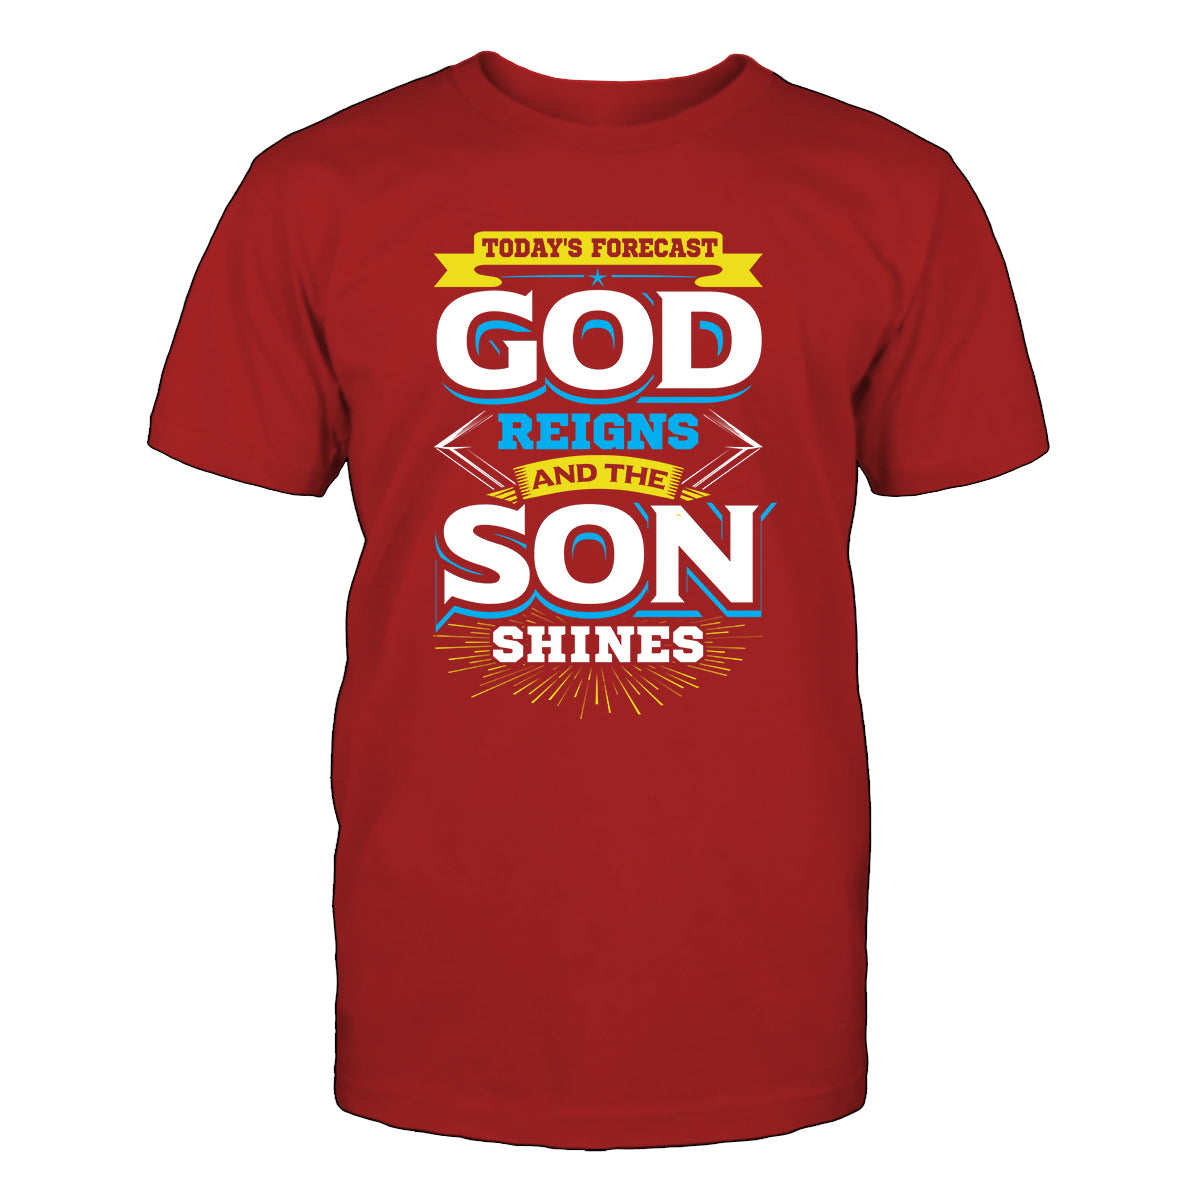 God Reigns And The Son Shines Men's T-Shirt